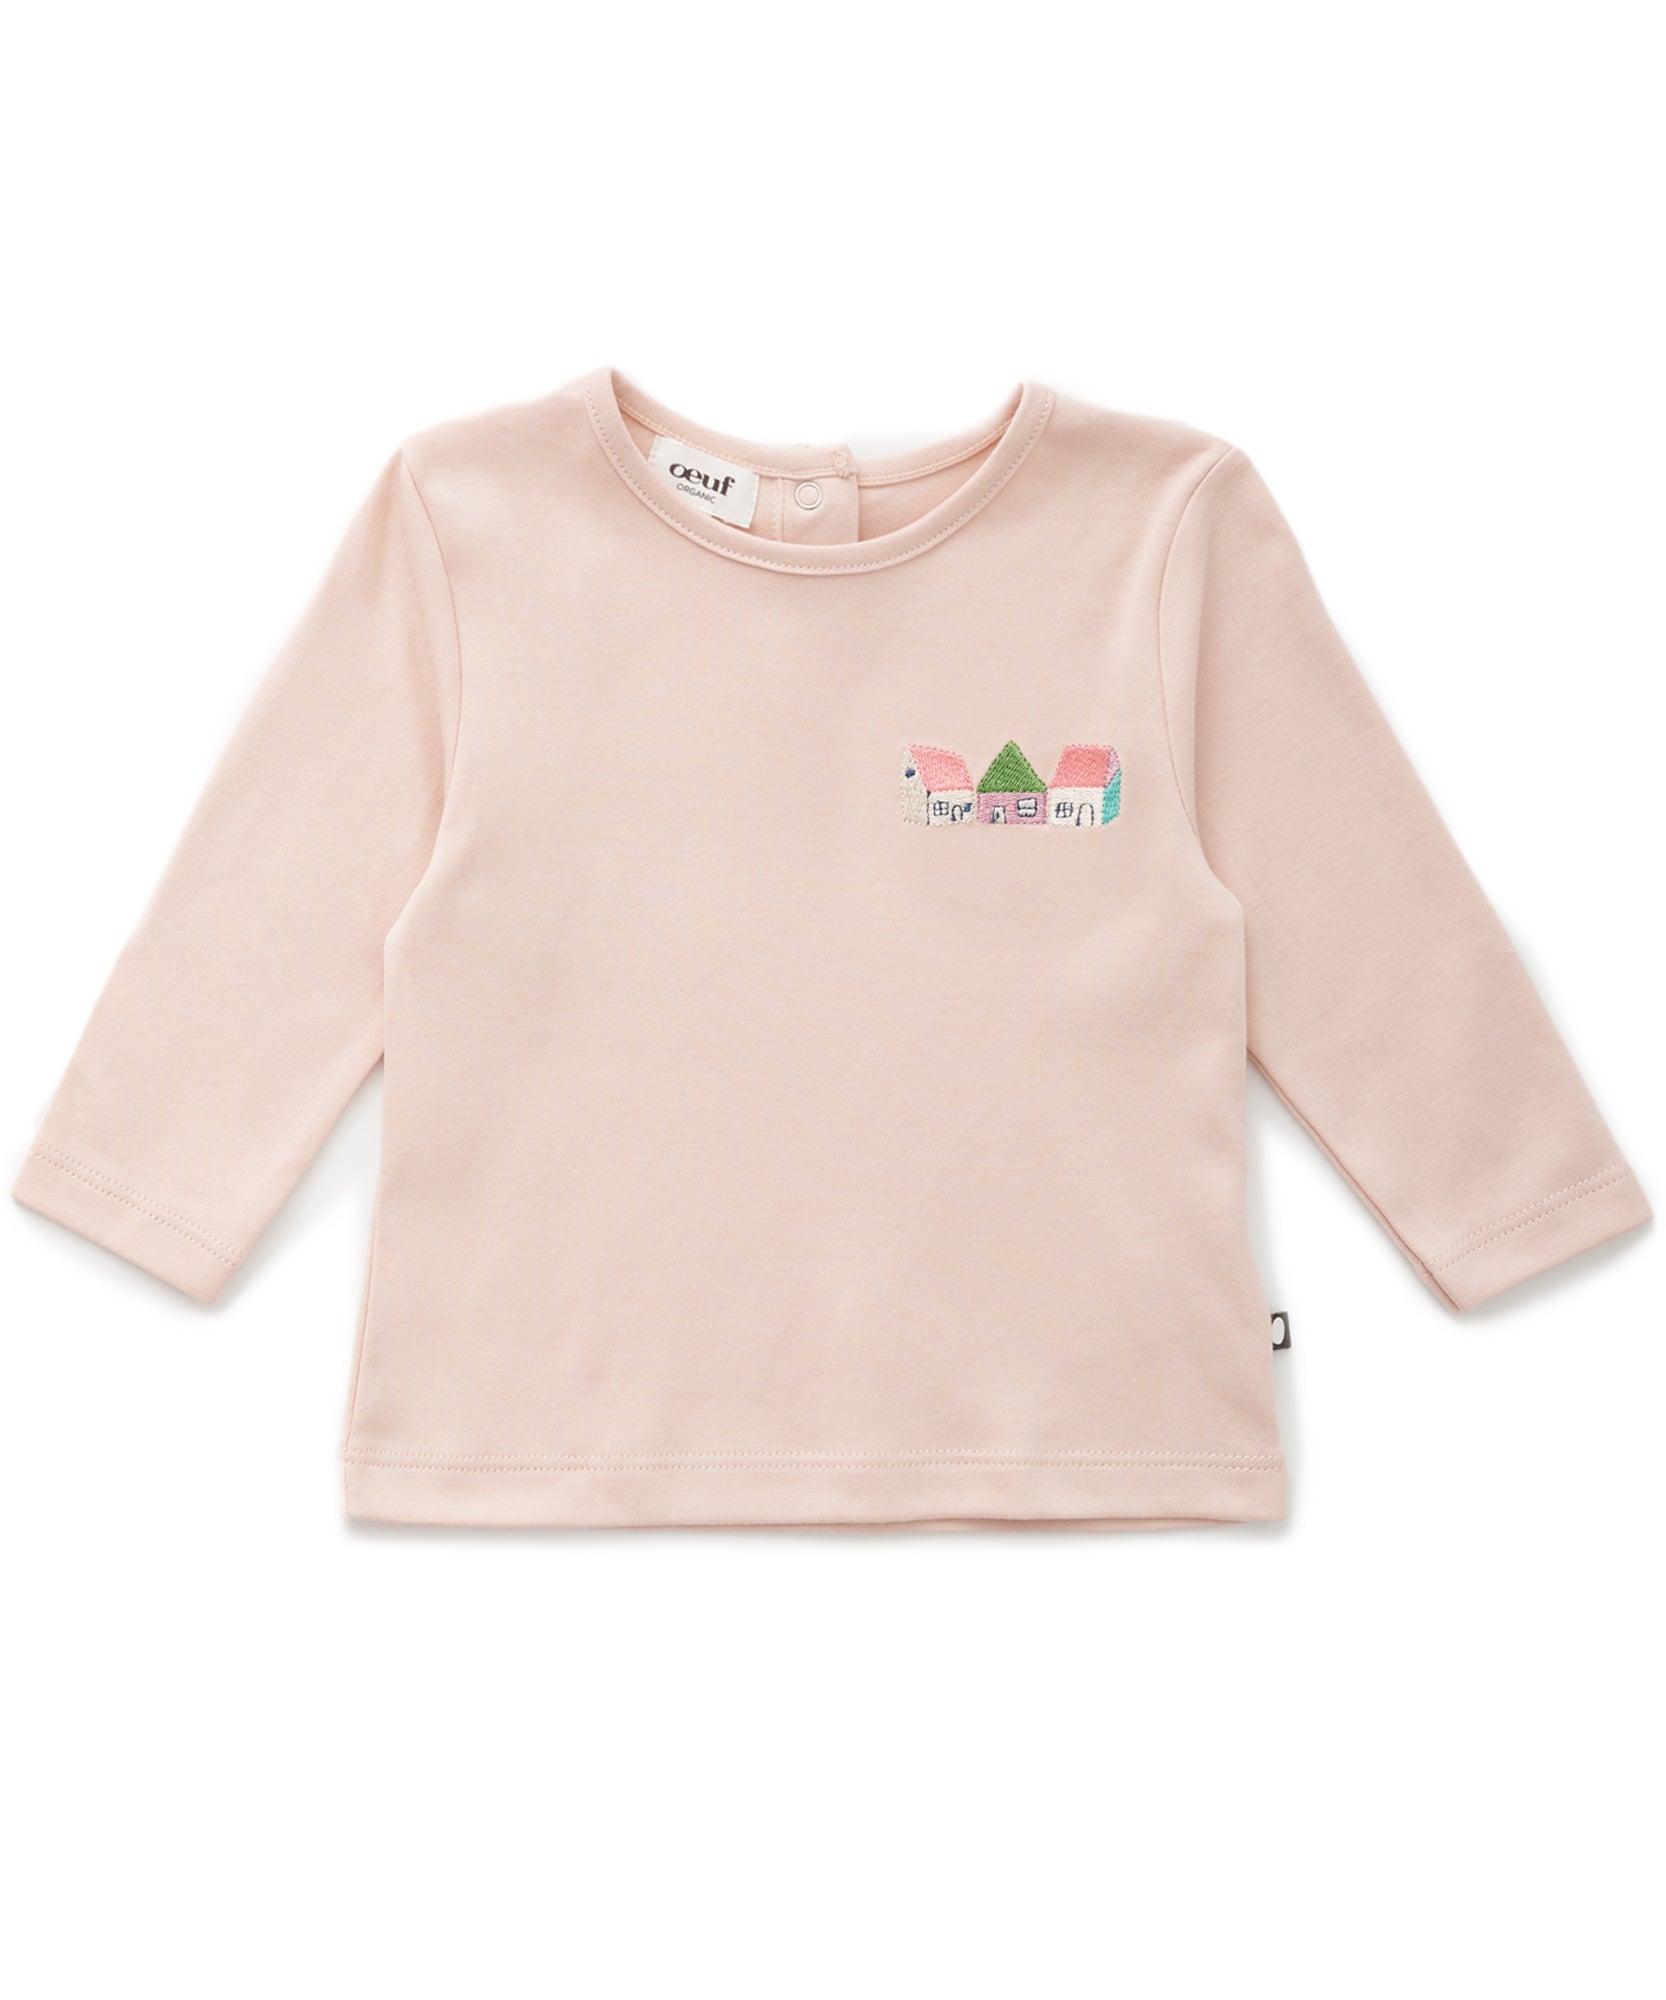 Embroidered Long Sleeve Tee - Baby